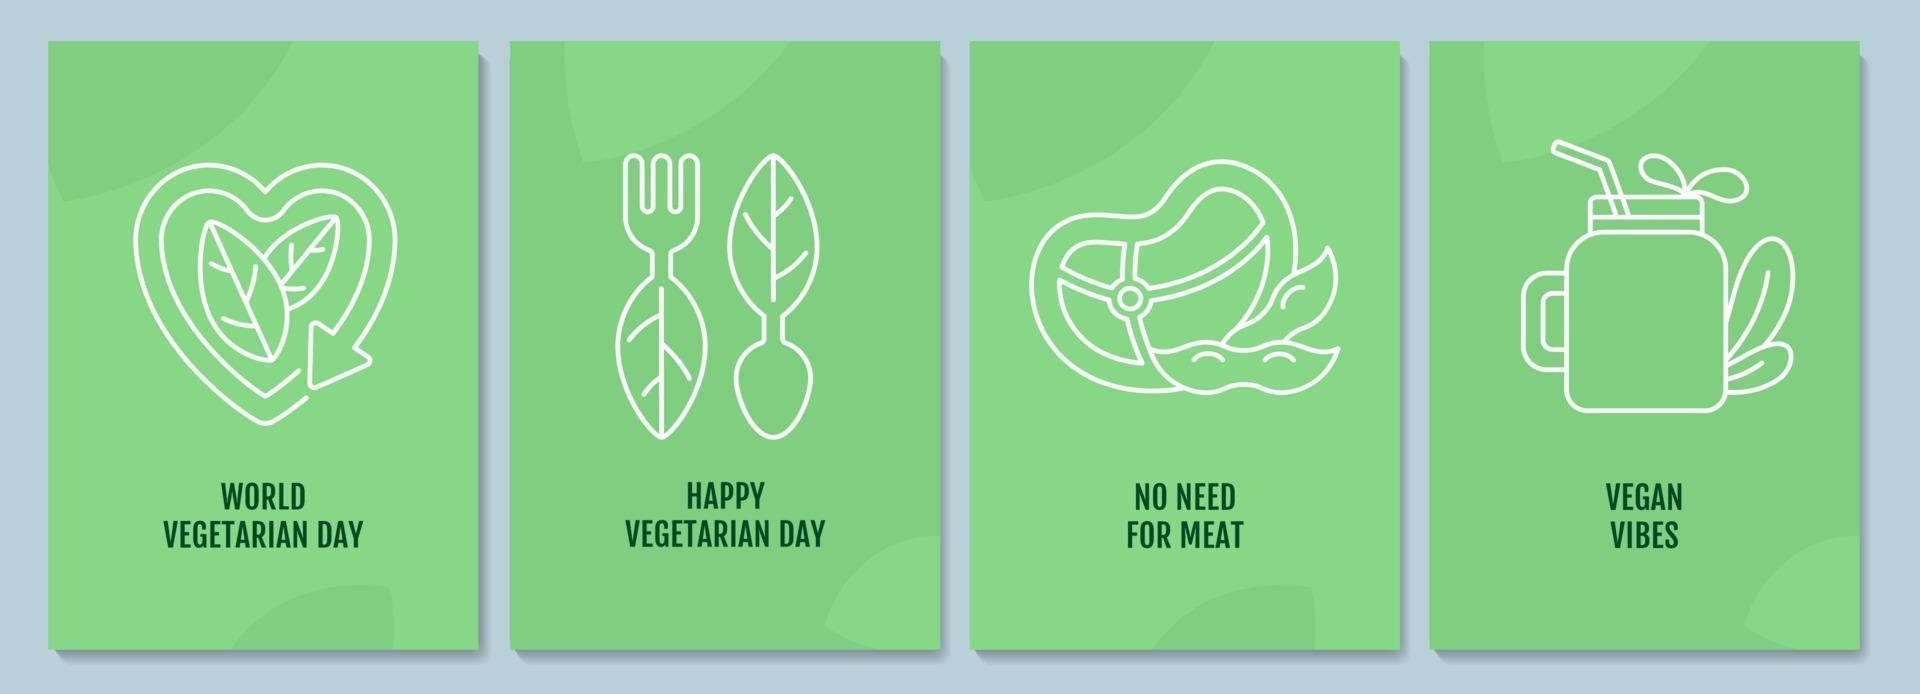 Veganism movement postcards with linear glyph icon set vector